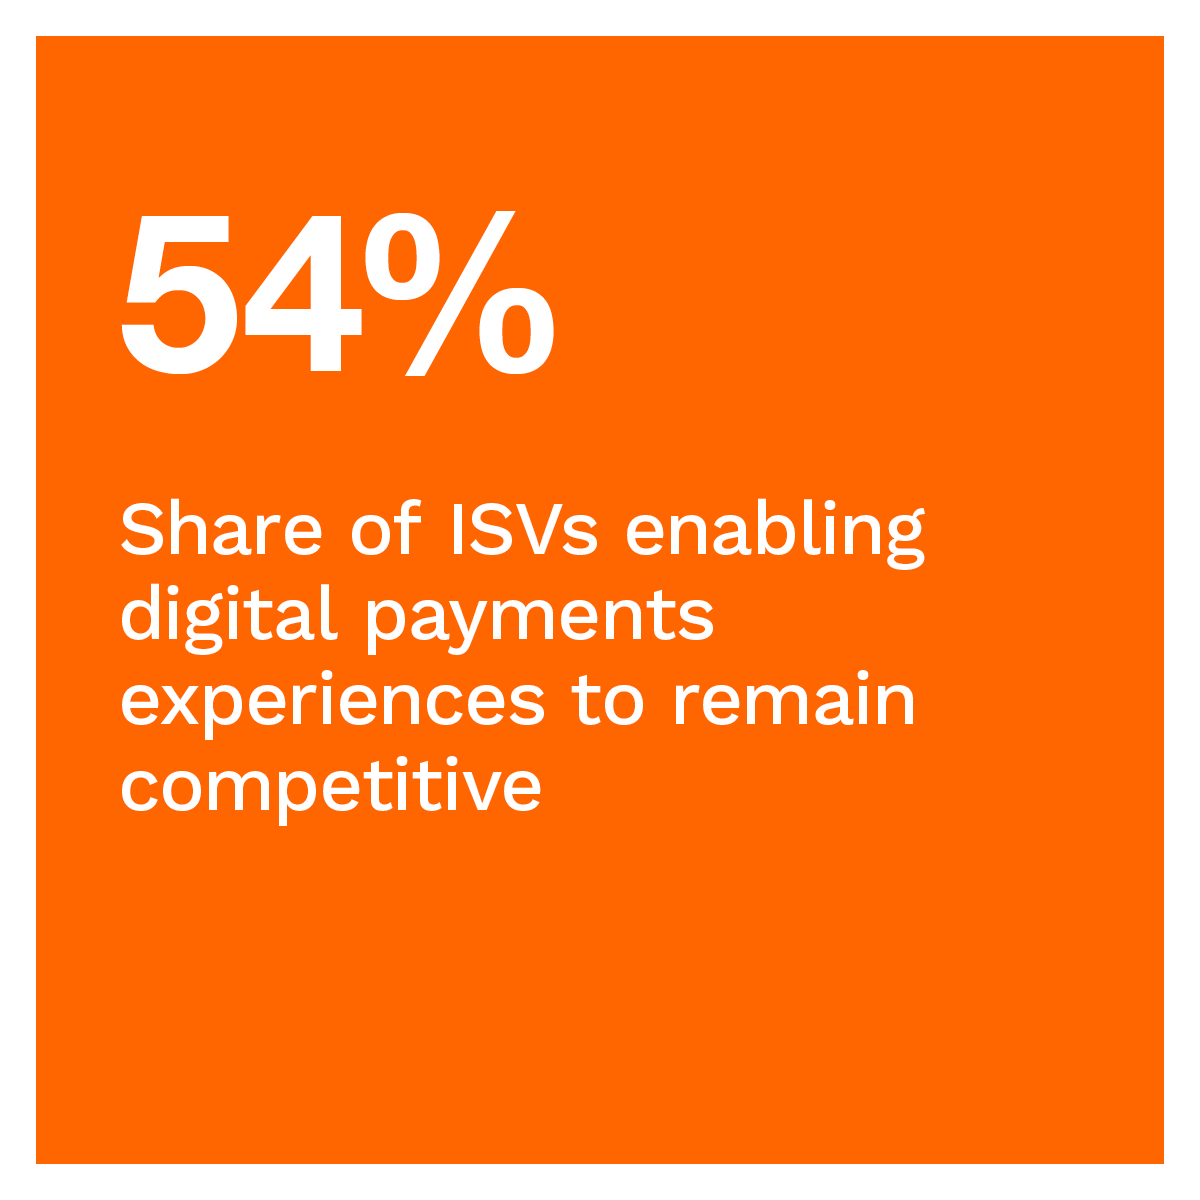 54%: Share of ISVs enabling digital payments experiences to remain competitive 